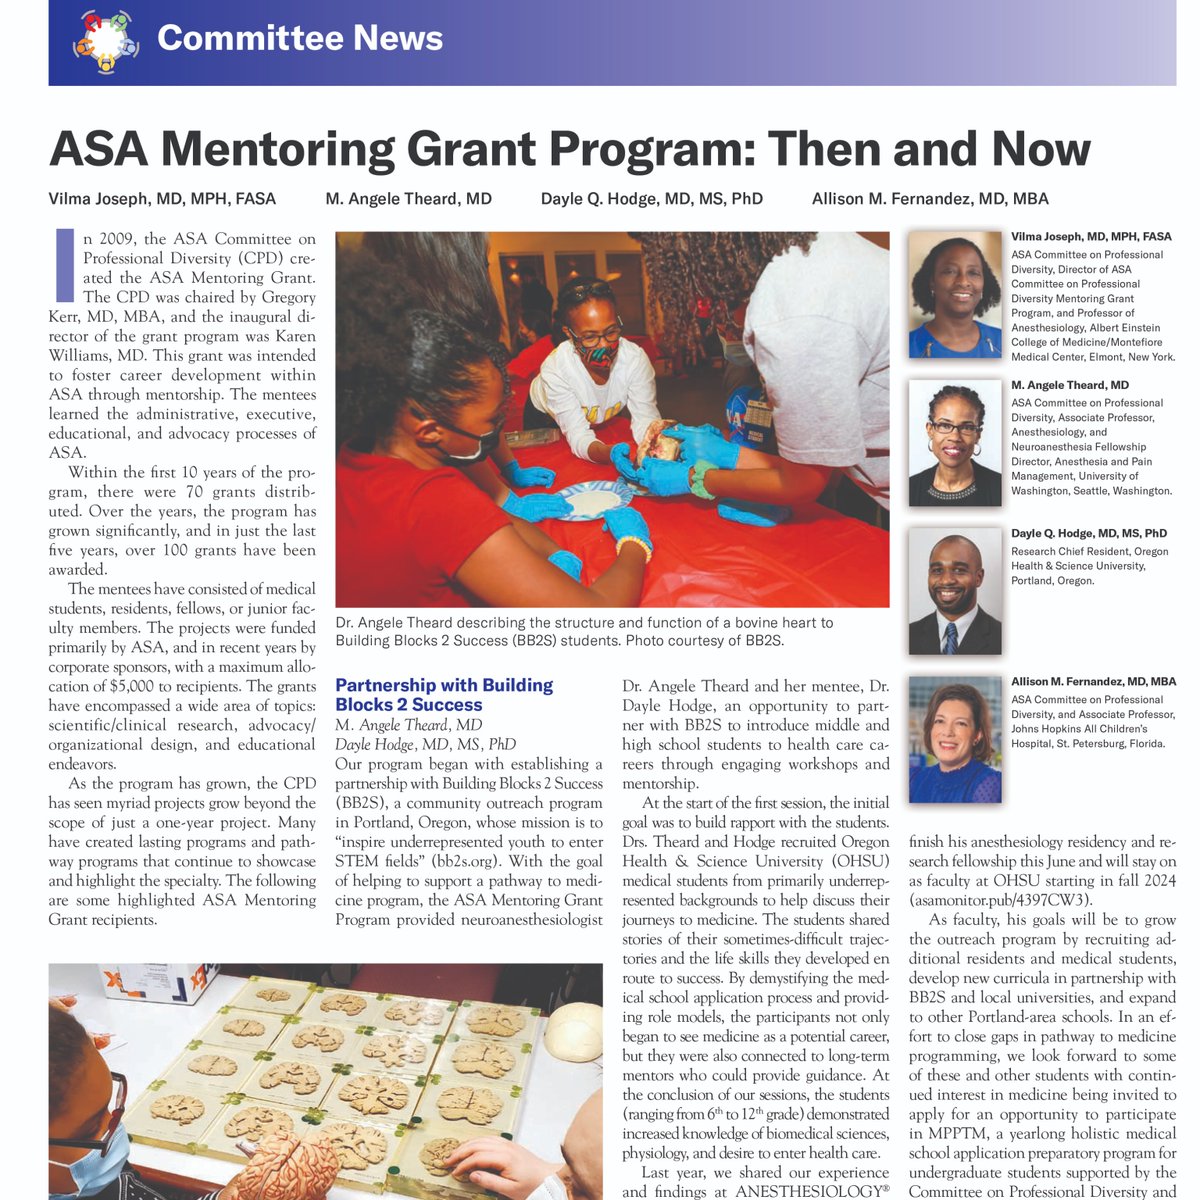 Find out how the ASA Mentoring Grant program has grown and how the application process works. 👉ow.ly/wVxg50RyFCt @DayleQHodge #ASAMentoring #ProfessionalDiversity